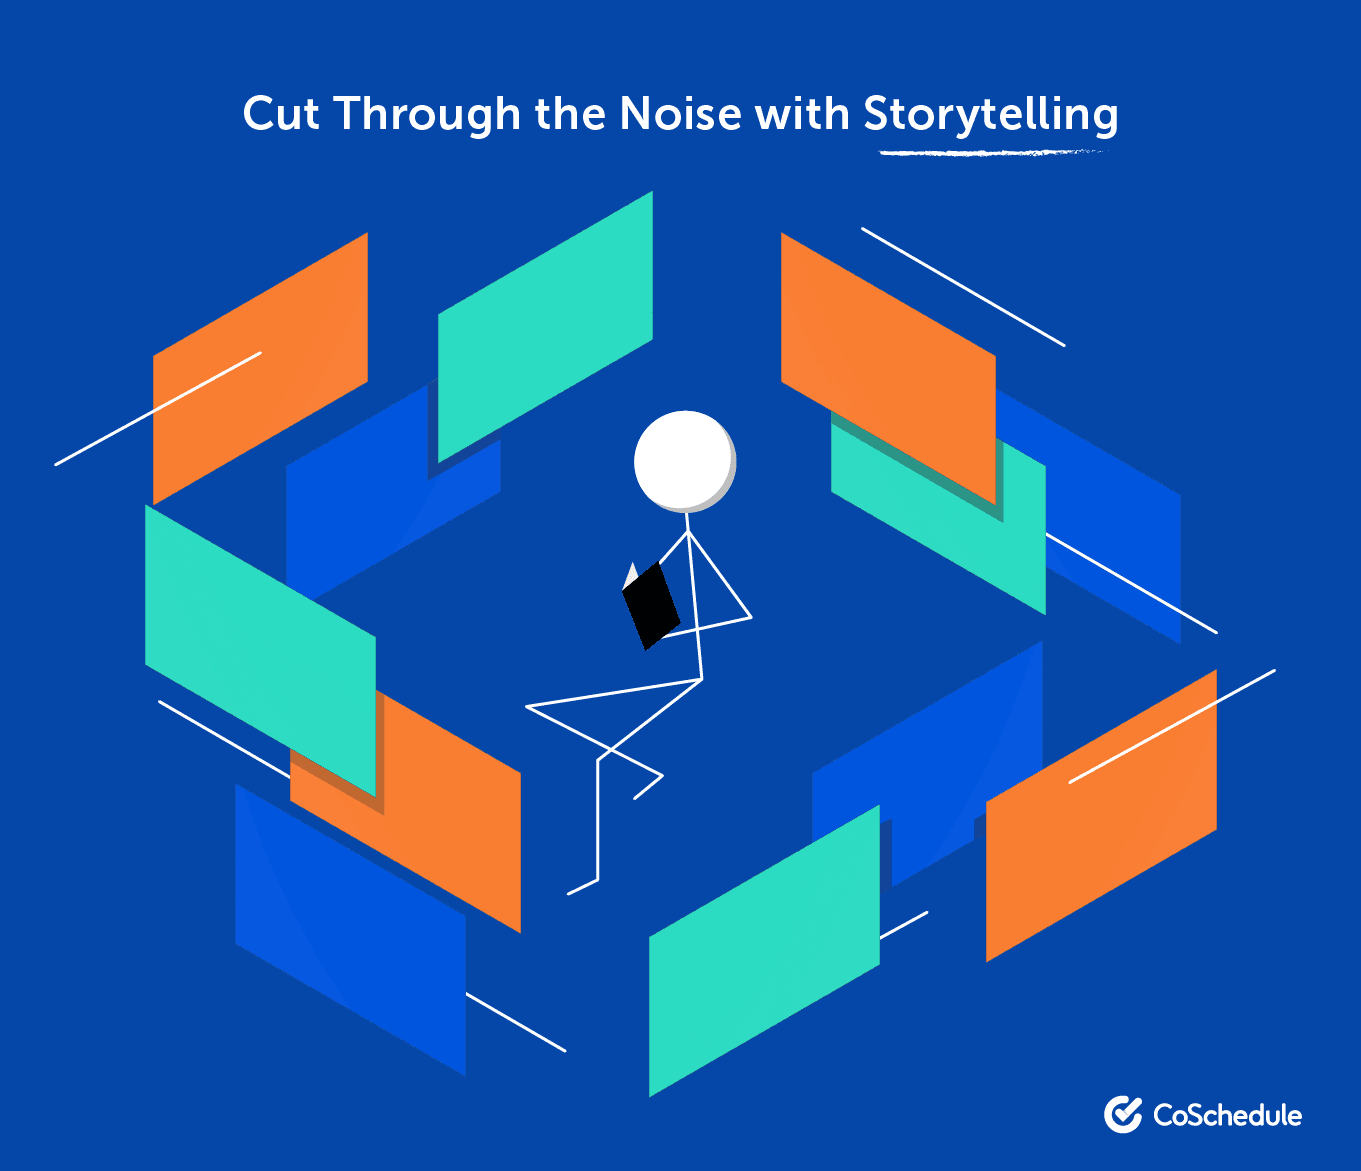 Cut through the noise with storytelling